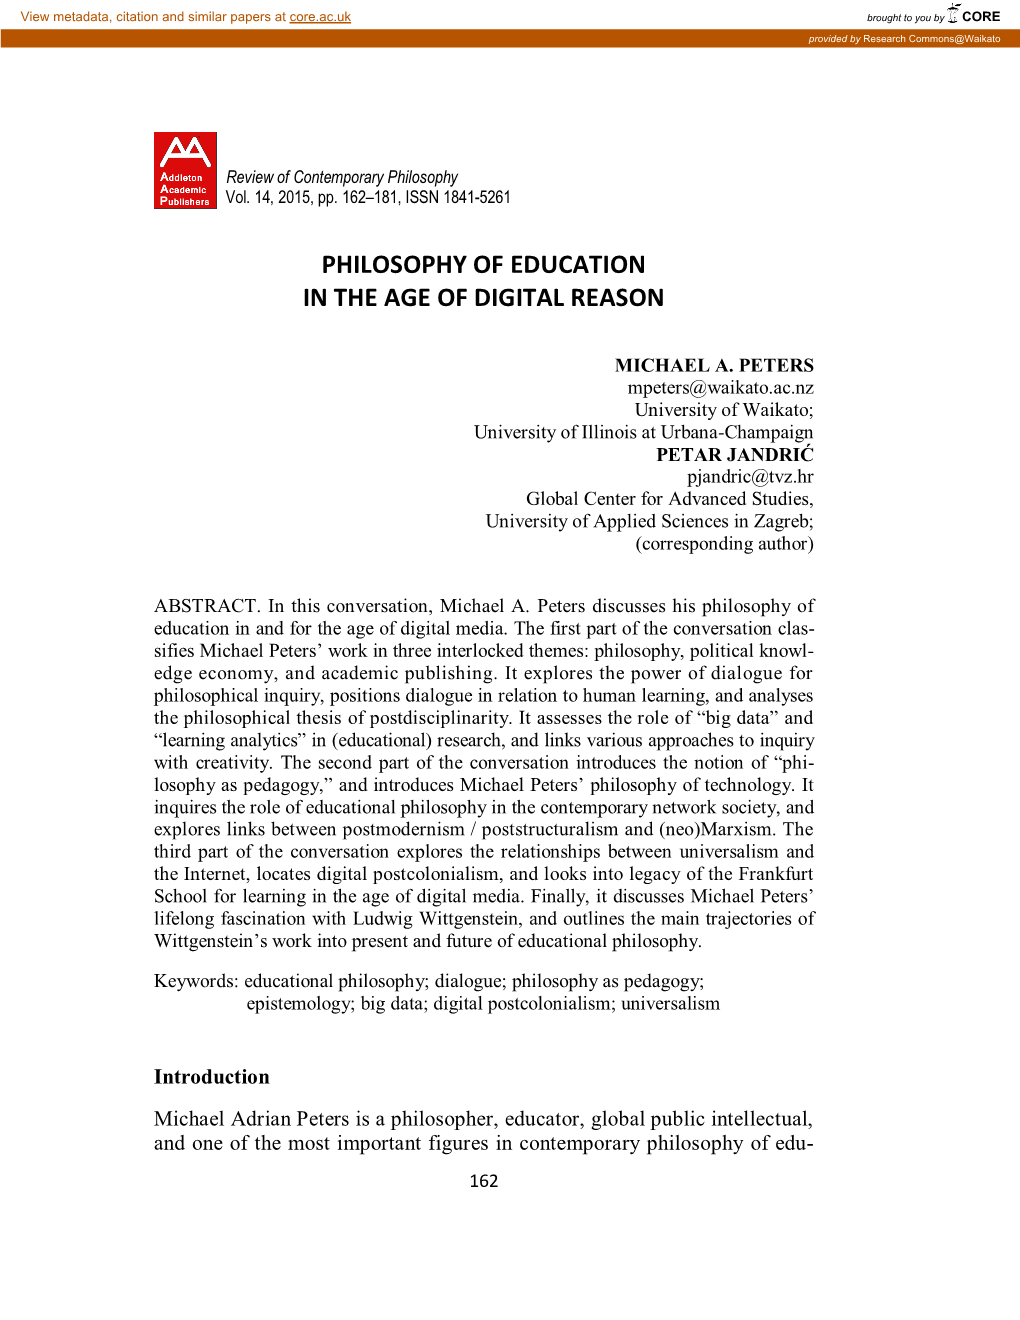 Philosophy of Education in the Age of Digital Reason